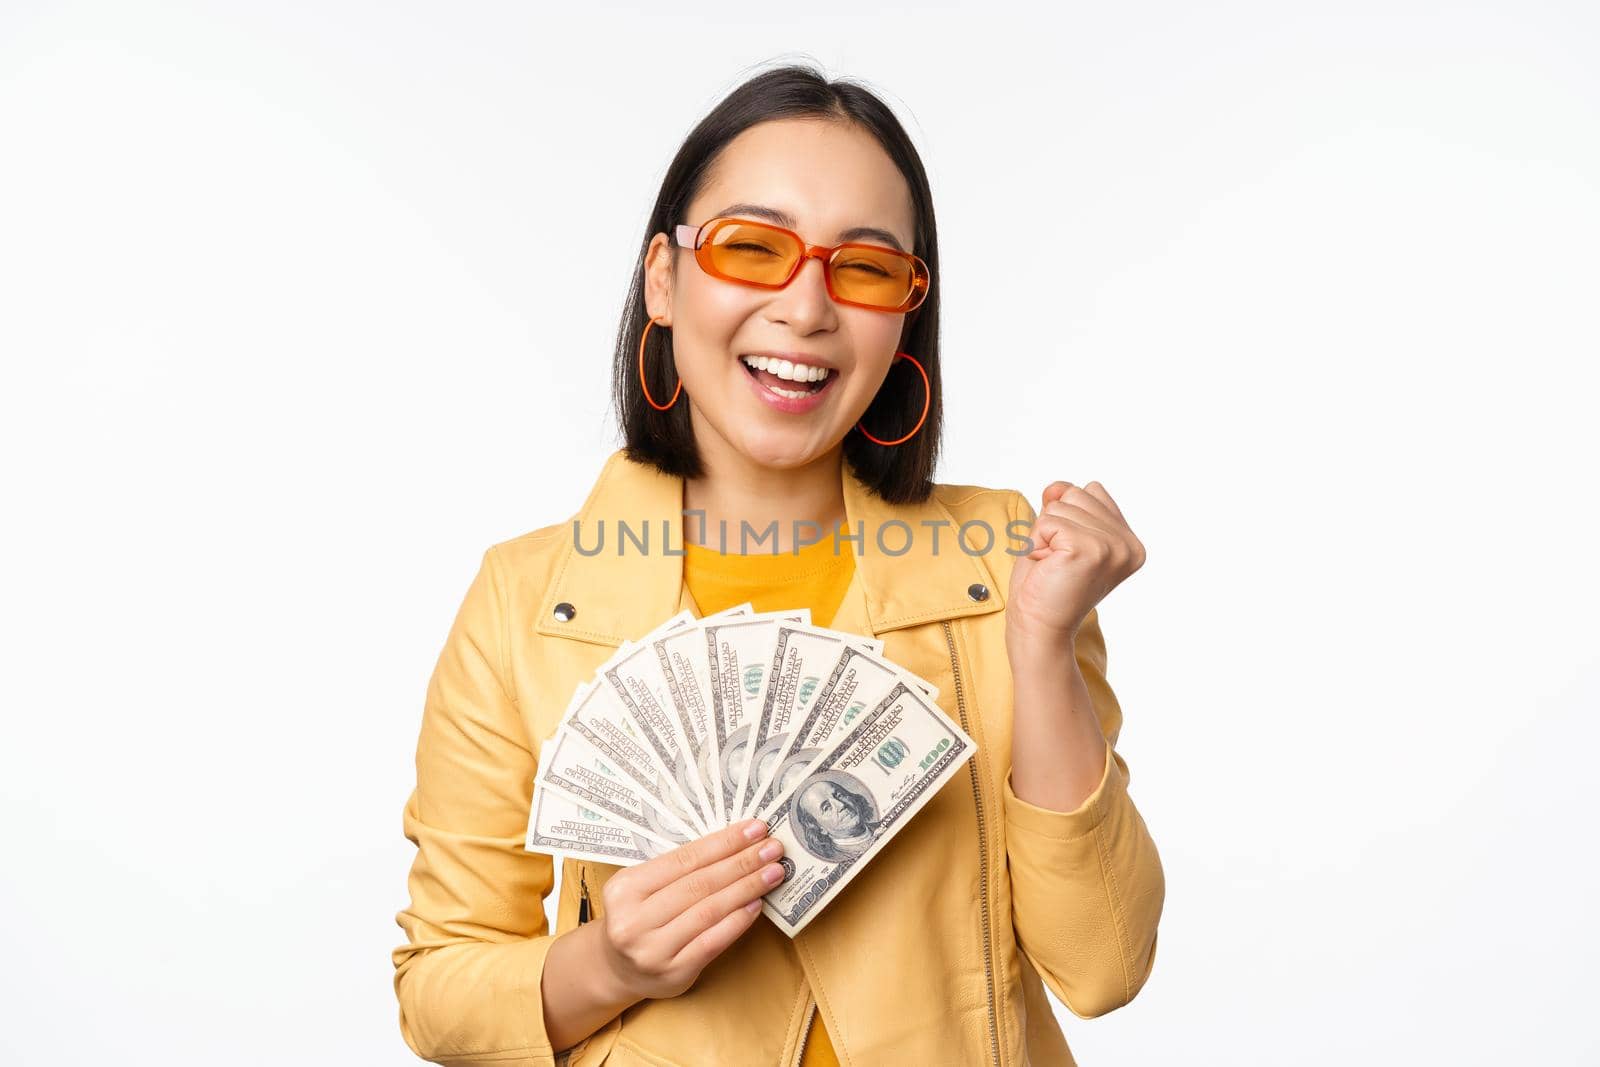 Stylish smiling asian girl holding money cash, showing dollars and celebrating, standing over white background. Copy space